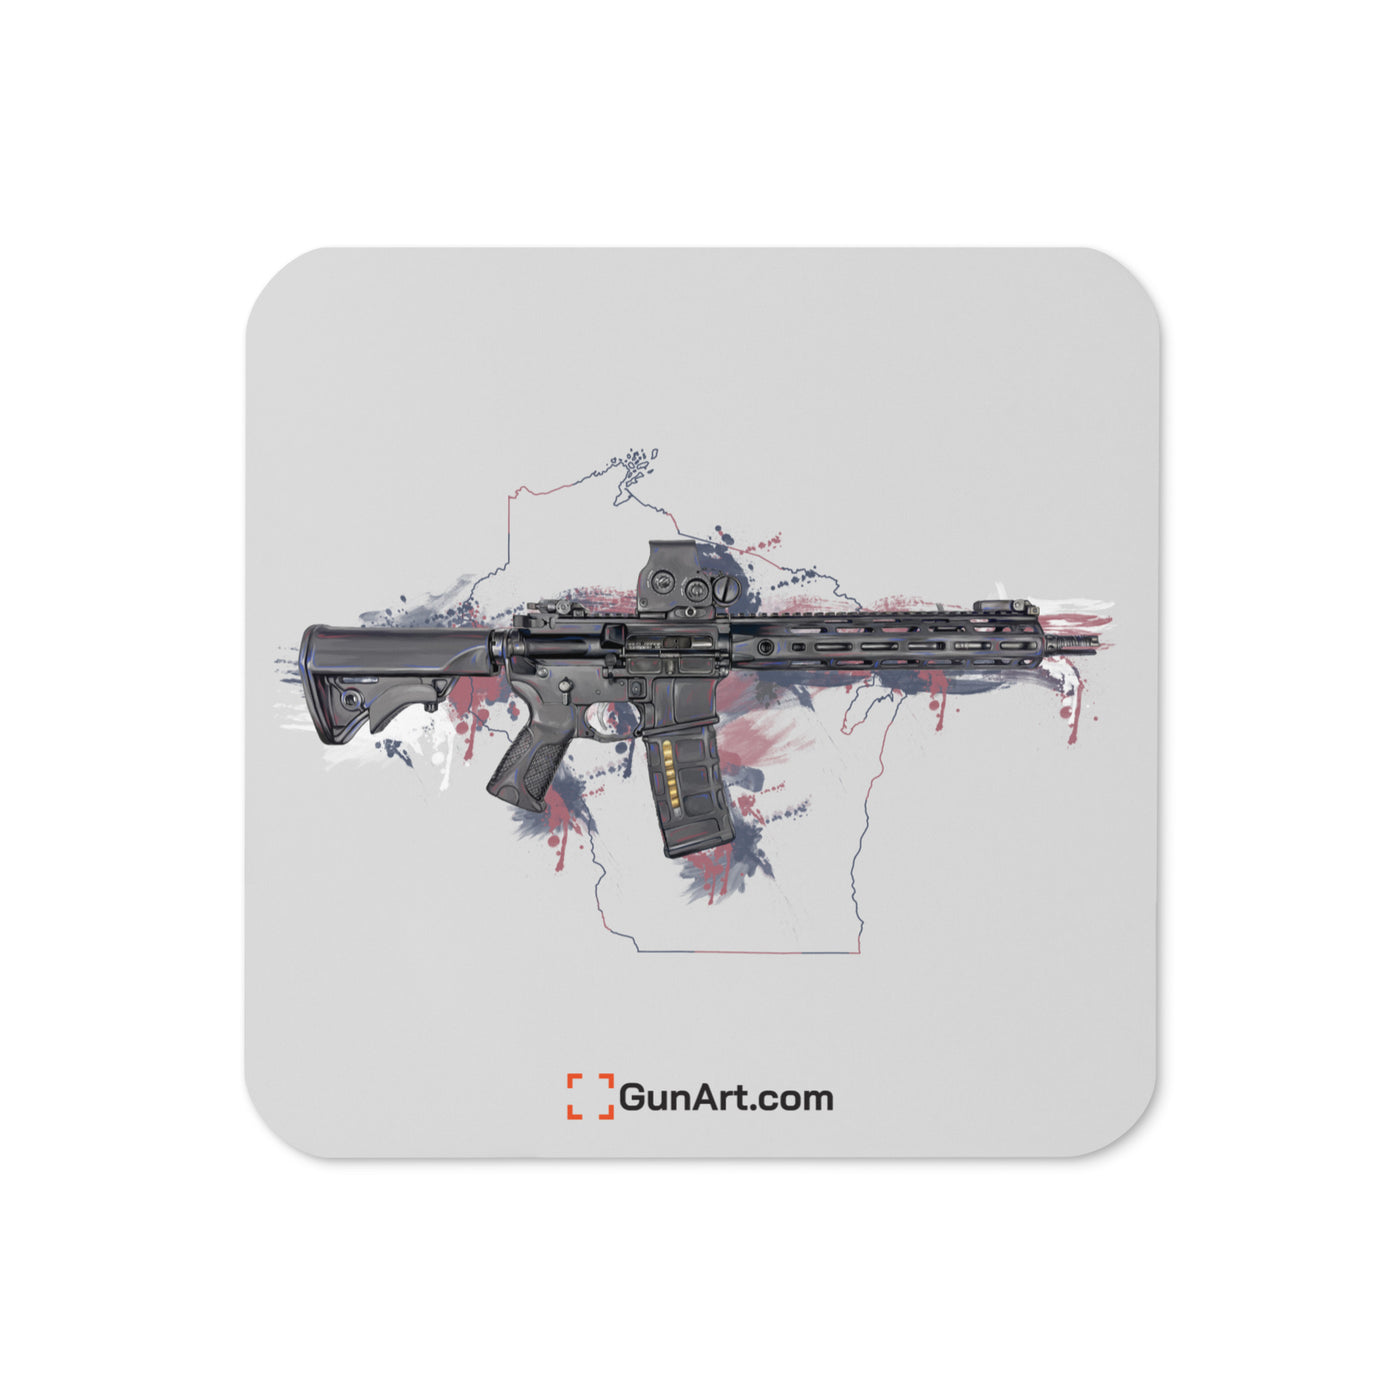 Defending Freedom - Wisconsin - AR-15 State Cork-back Coaster - Colored State